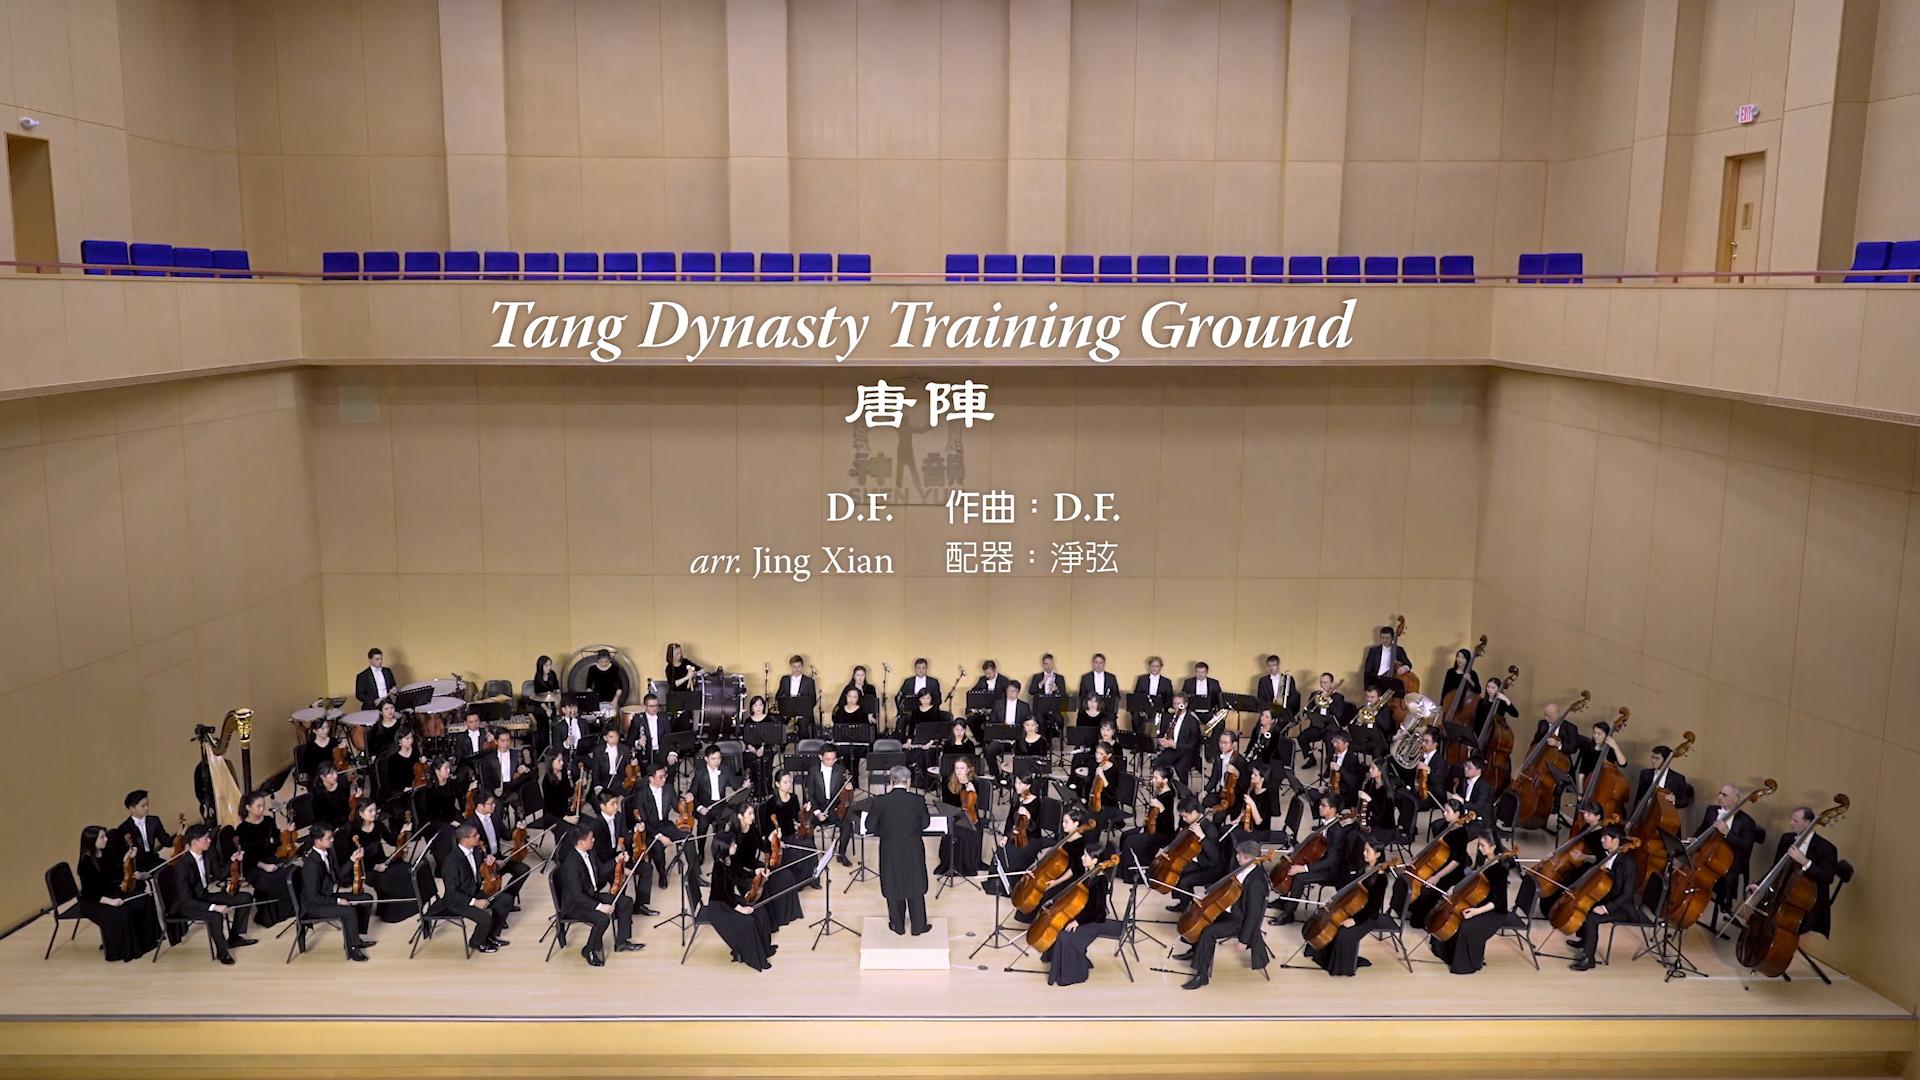 Tang Dynasty Training Ground - 2018 Shen Yun Symphony Orchestra